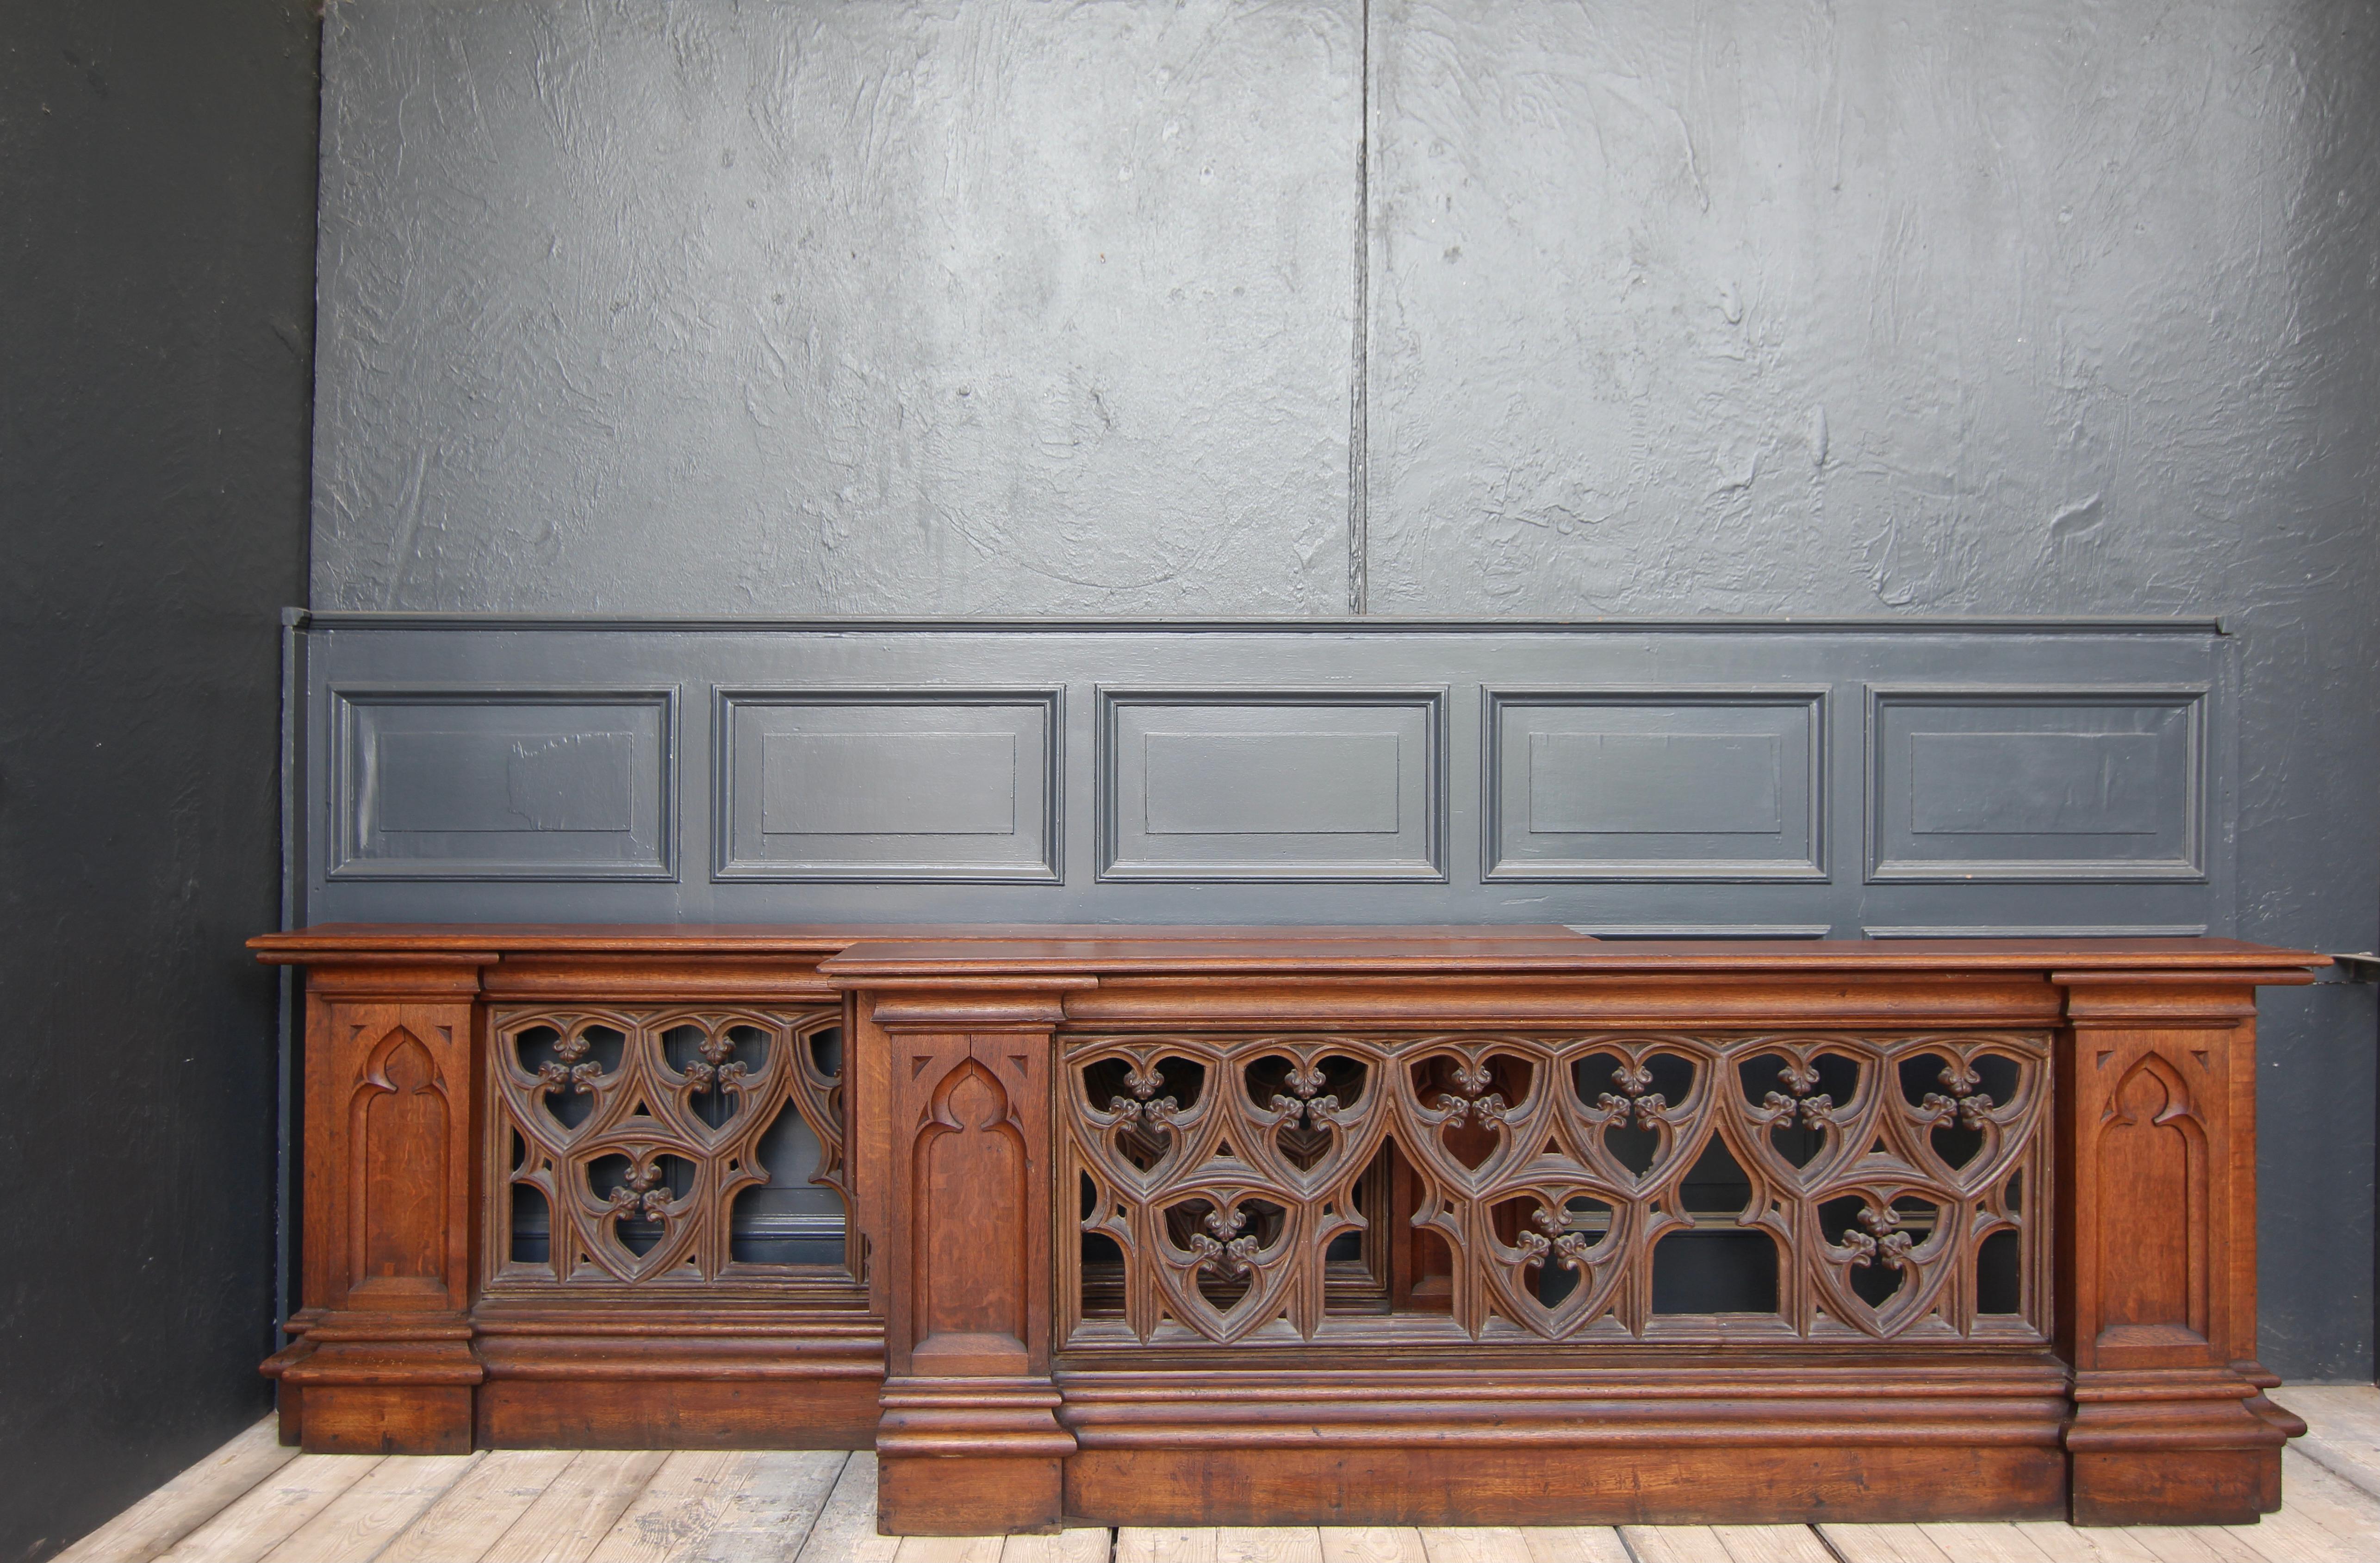 Neo-Gothic choir screens resp. 2 balustrades from the late 19th century. Solidly made of oak wood and cast iron.

Choir screens have been part of the interior decoration of churches since early Christian times. Today, as then, they separate the